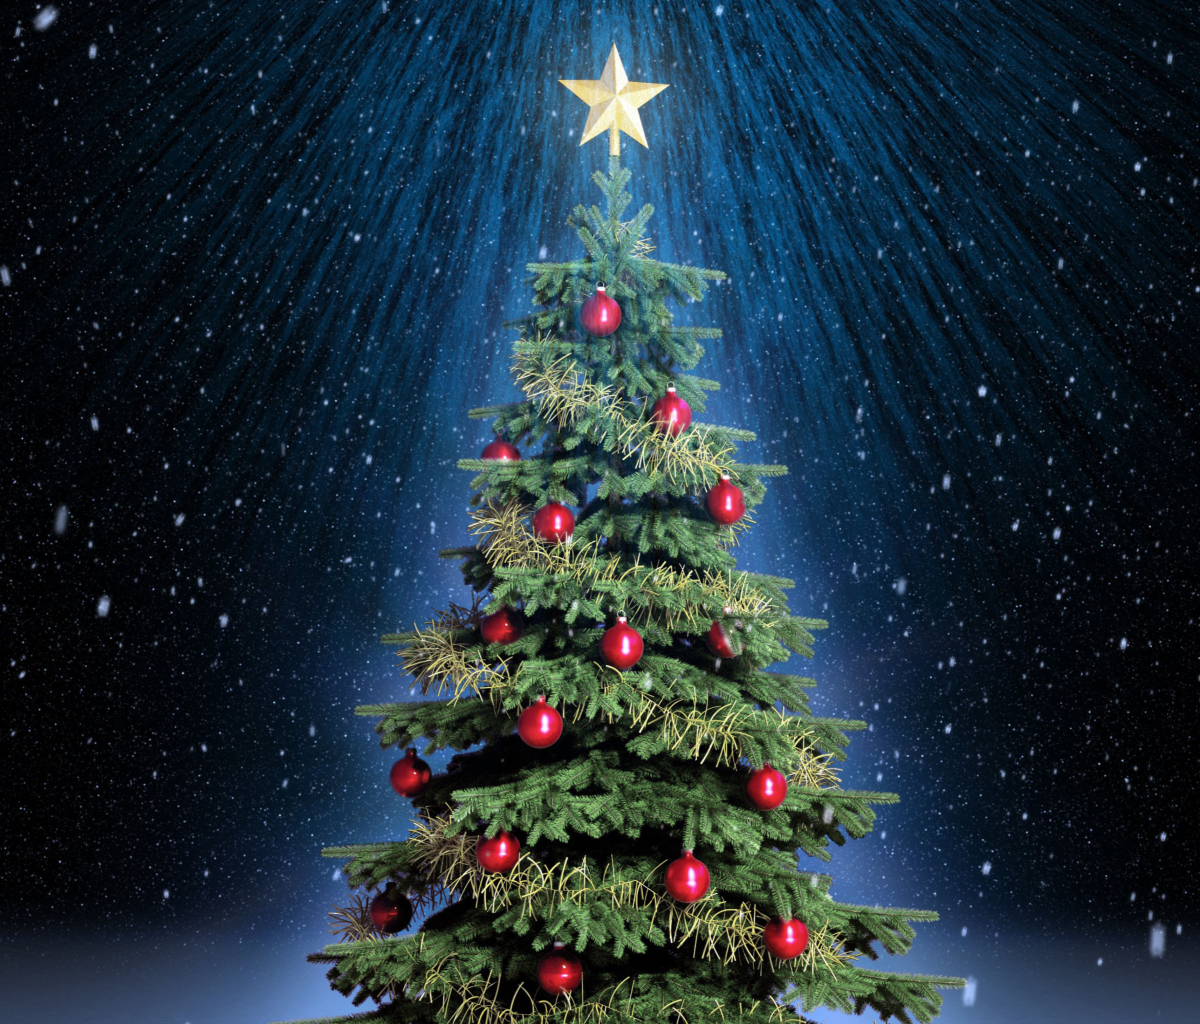 Das Classic Christmas Tree With Star On Top Wallpaper 1200x1024